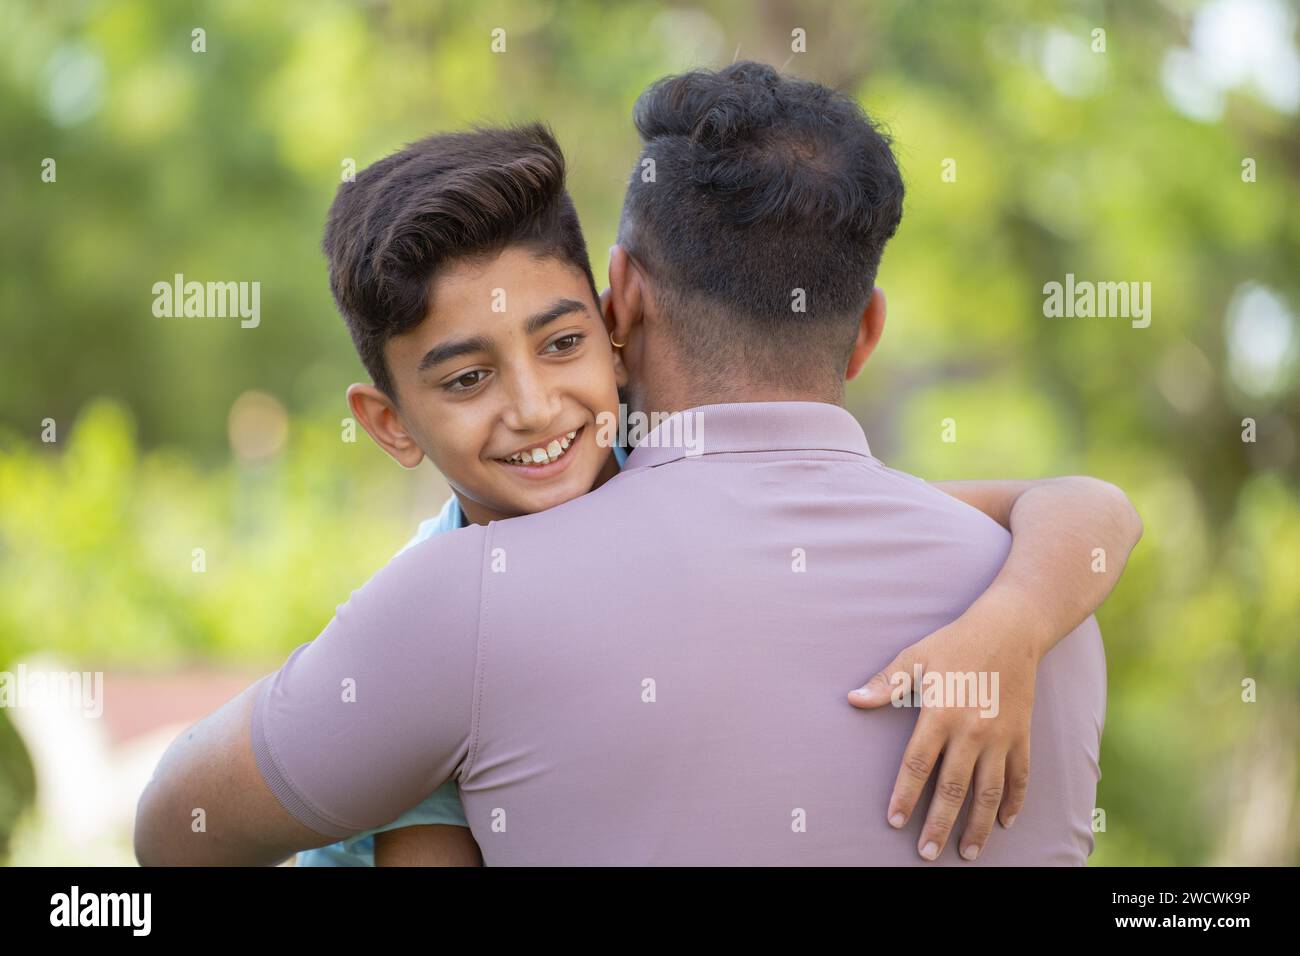 Cheerful indian son hugging or embracing to father at park - concept of relationship, fatherhood and affection Stock Photo